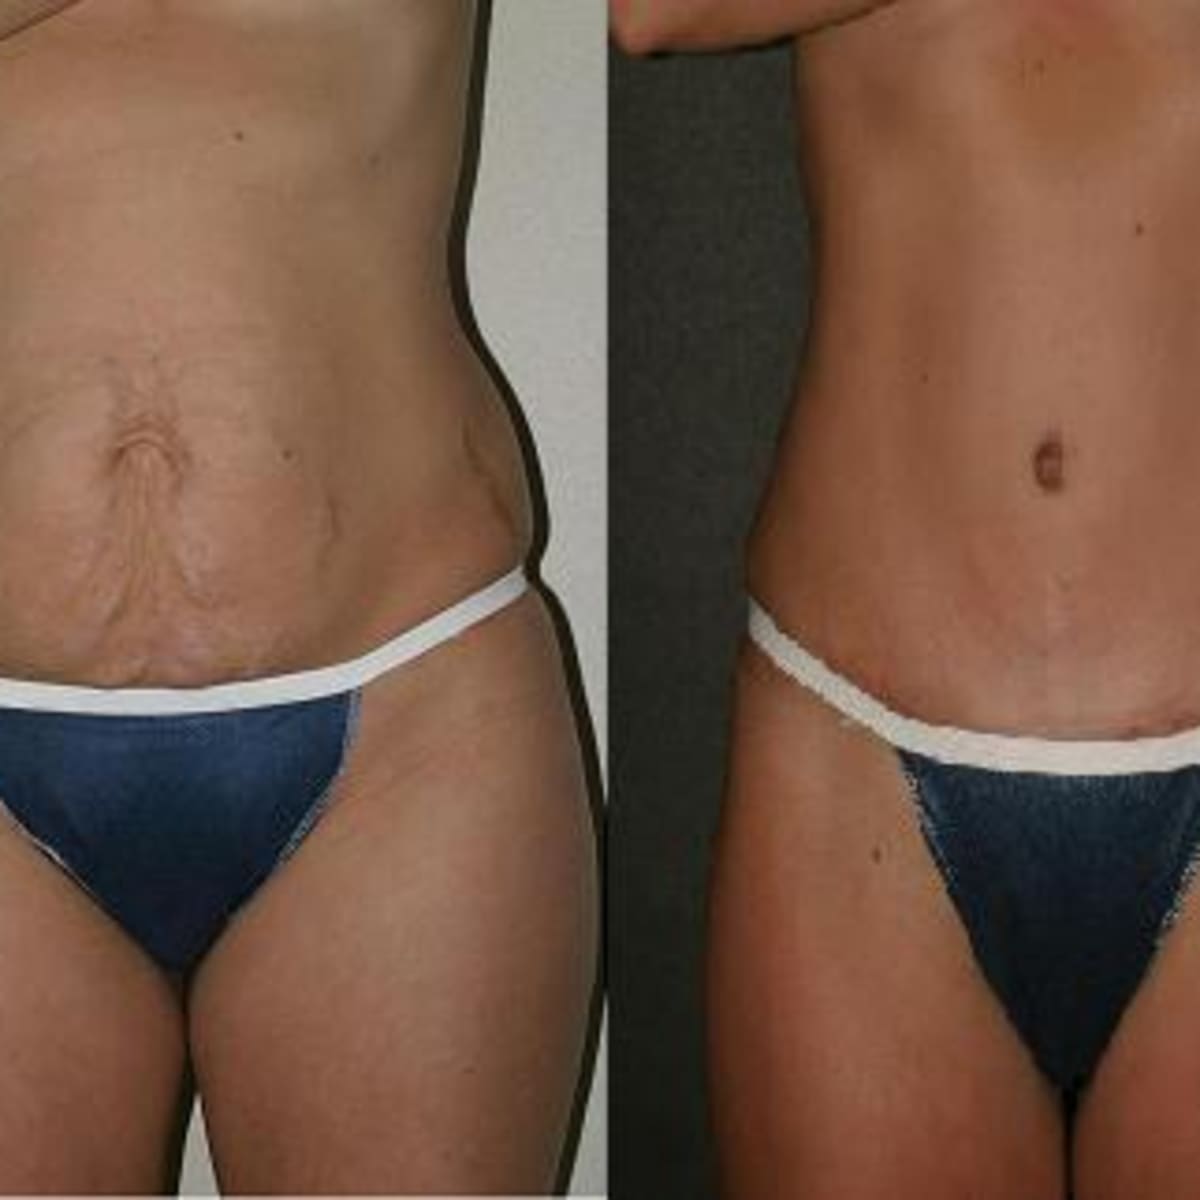 Are You a Good Candidate for a Mini Tummy Tuck?